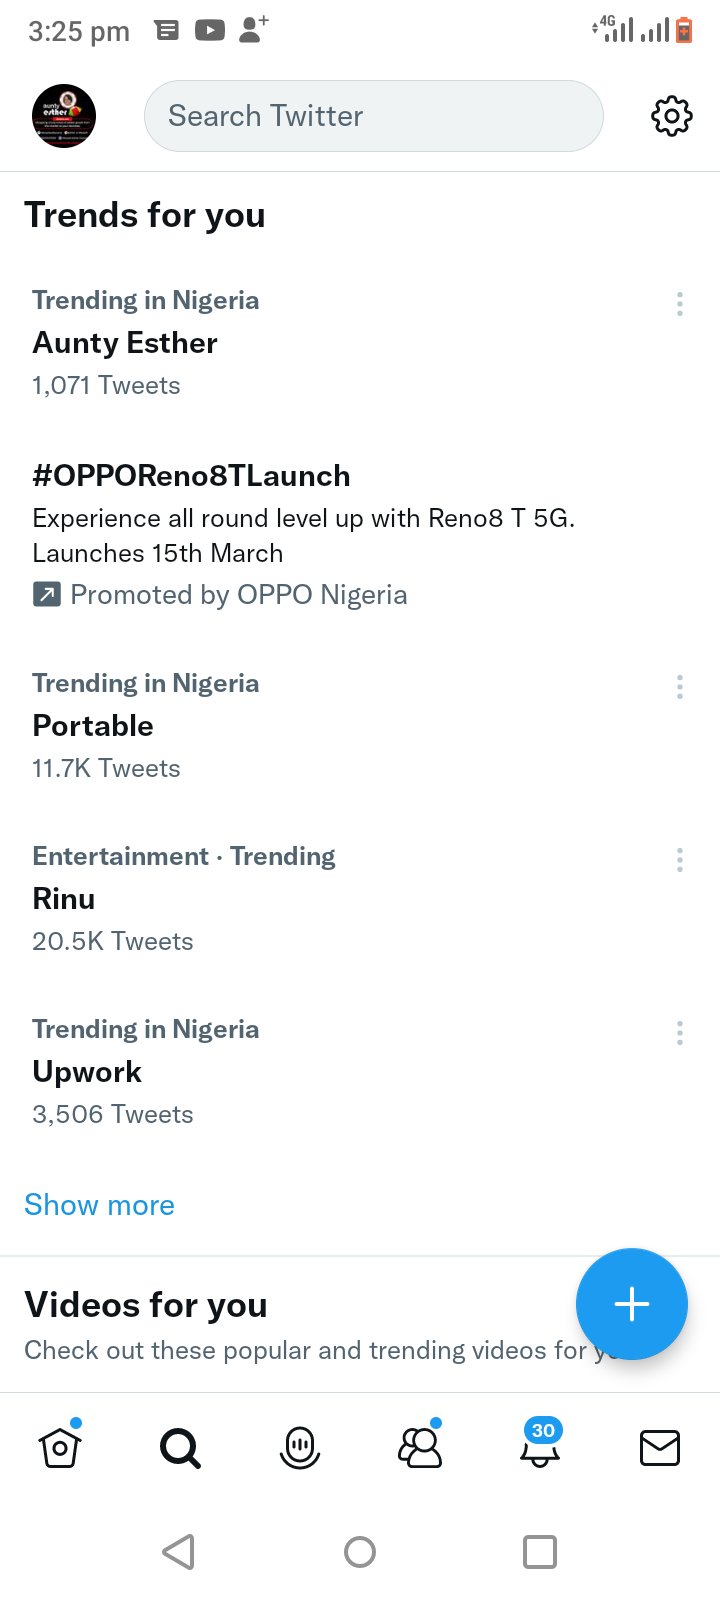 3.25 pm 6 0 : Search Twitter Trends for you Trending in Nigeria Aunty Esther 1,071 Tweets #OPPOReno8TLaunch Exparience all round level up with Reno8 5G. Launches I5th March Promoted by OPPO Nigeria Trending in Nigeria Portable I1.7K Tweets Entertainment . Trending Rinu 20,5k Tweets Trending in Nigeria Upwork 506 Tweets Show more Videos for you Check out these popular and trending videos tor